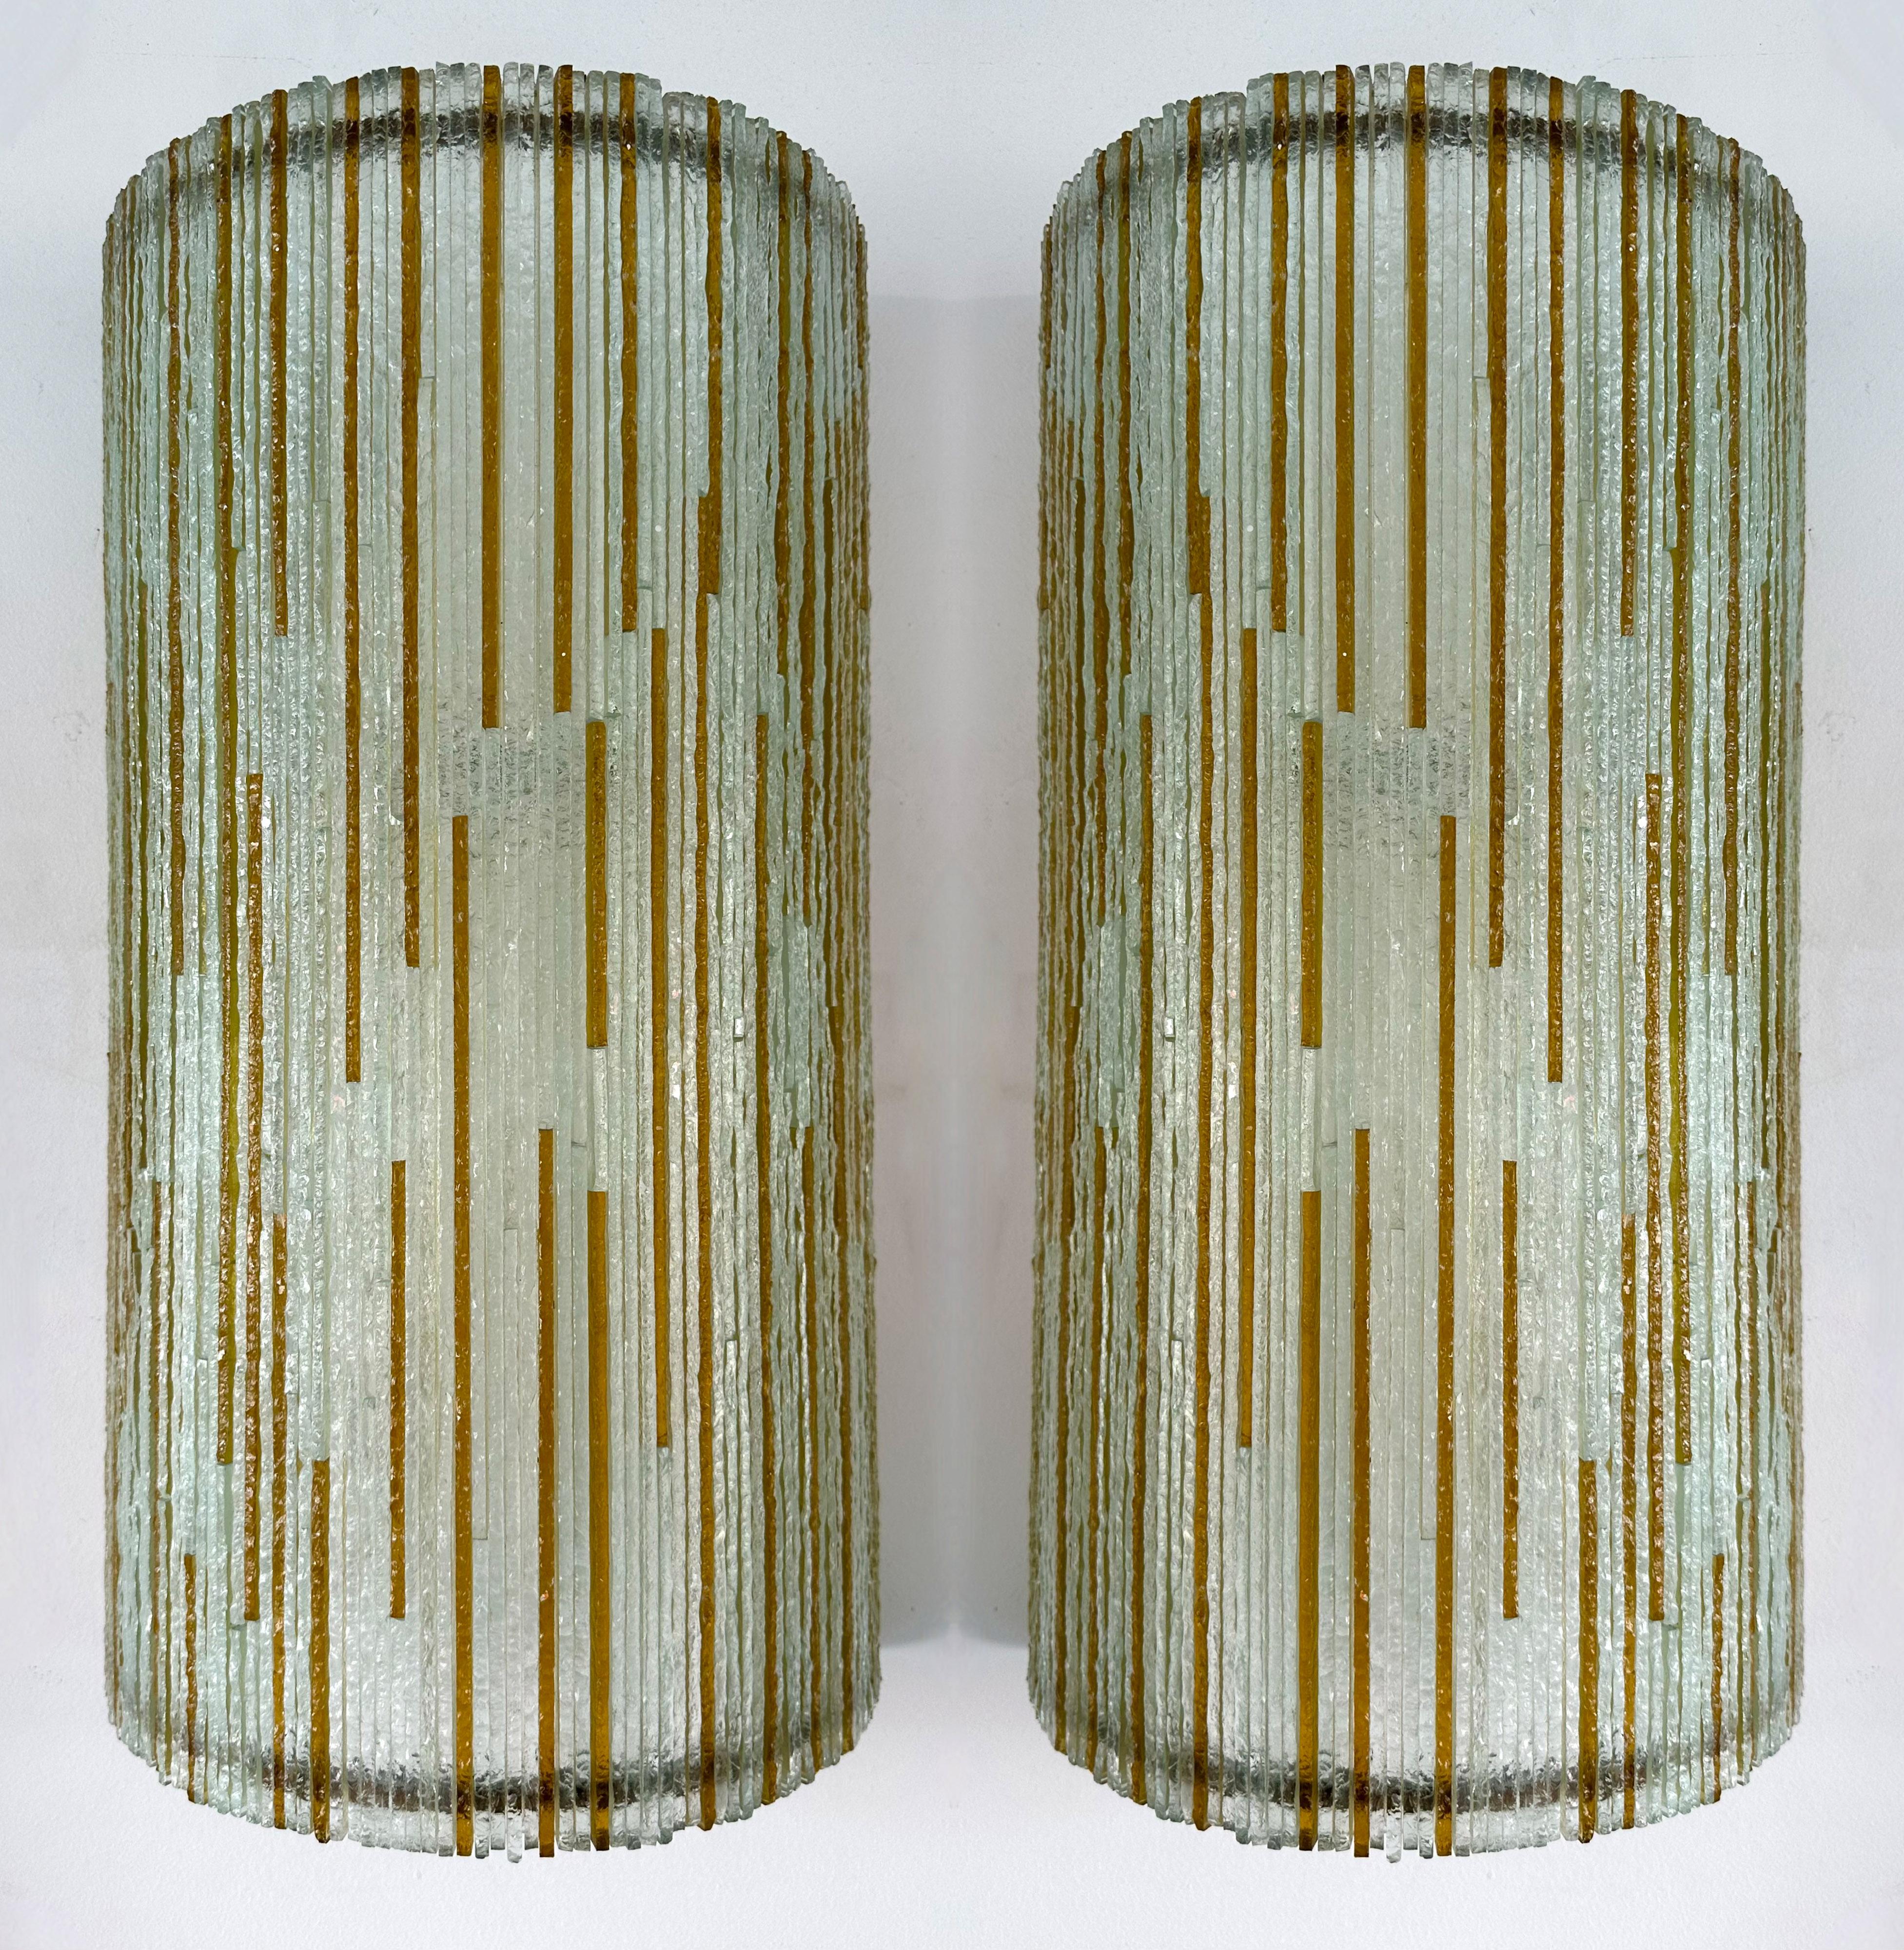 Large Pair of Hammered Amber Glass Ice Sconces by Poliarte, Italy, 1970s For Sale 5